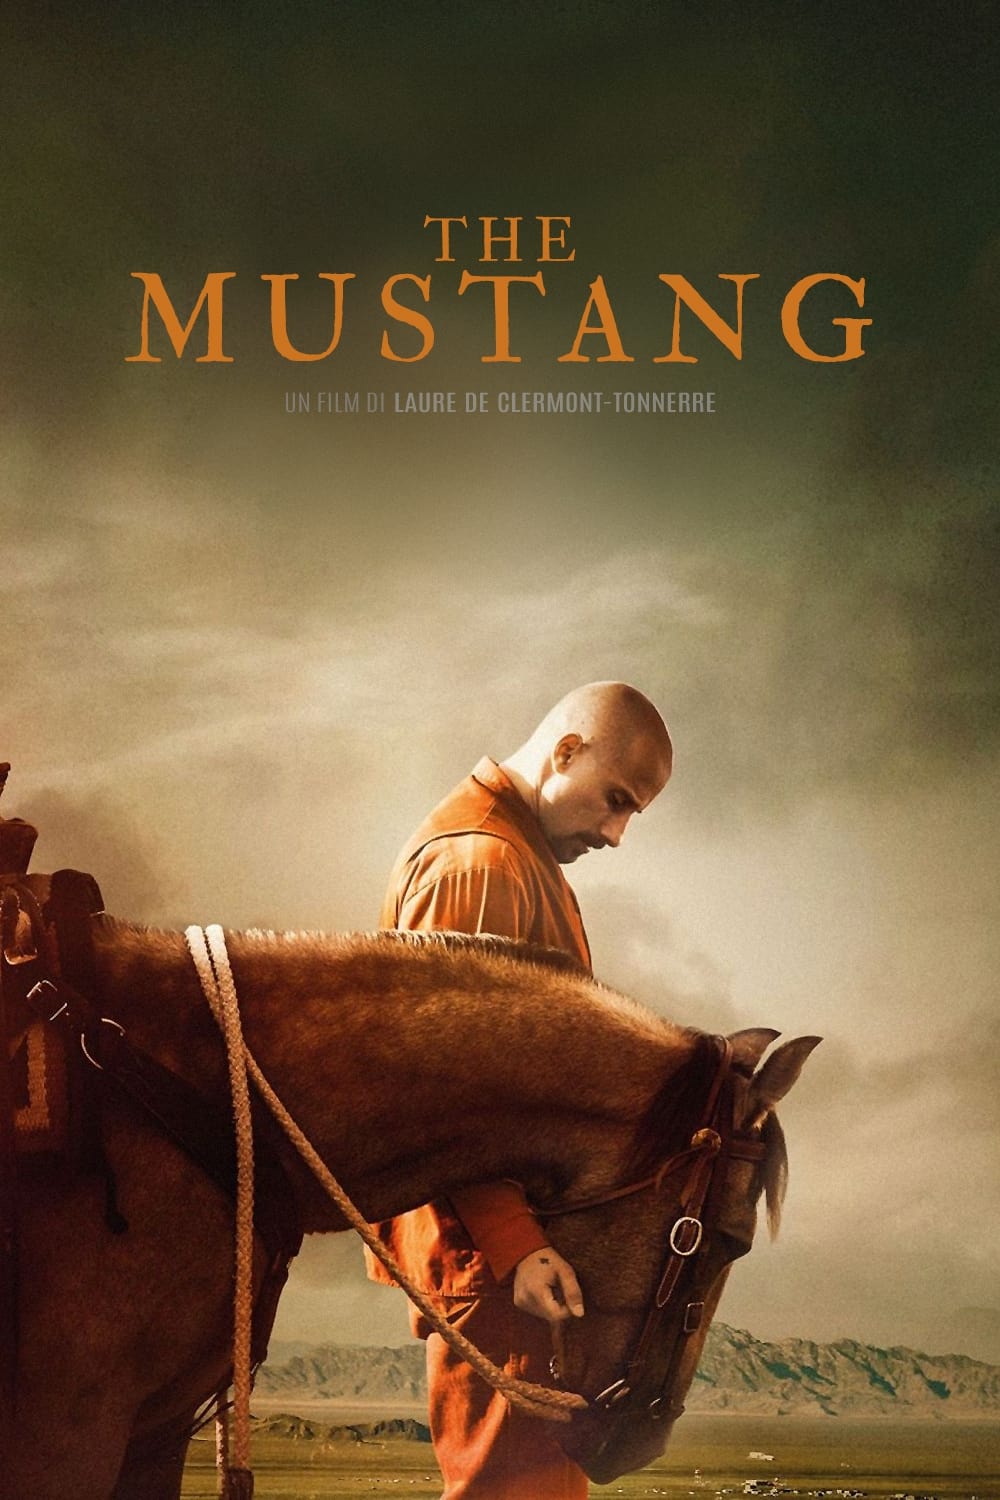 The Mustang film